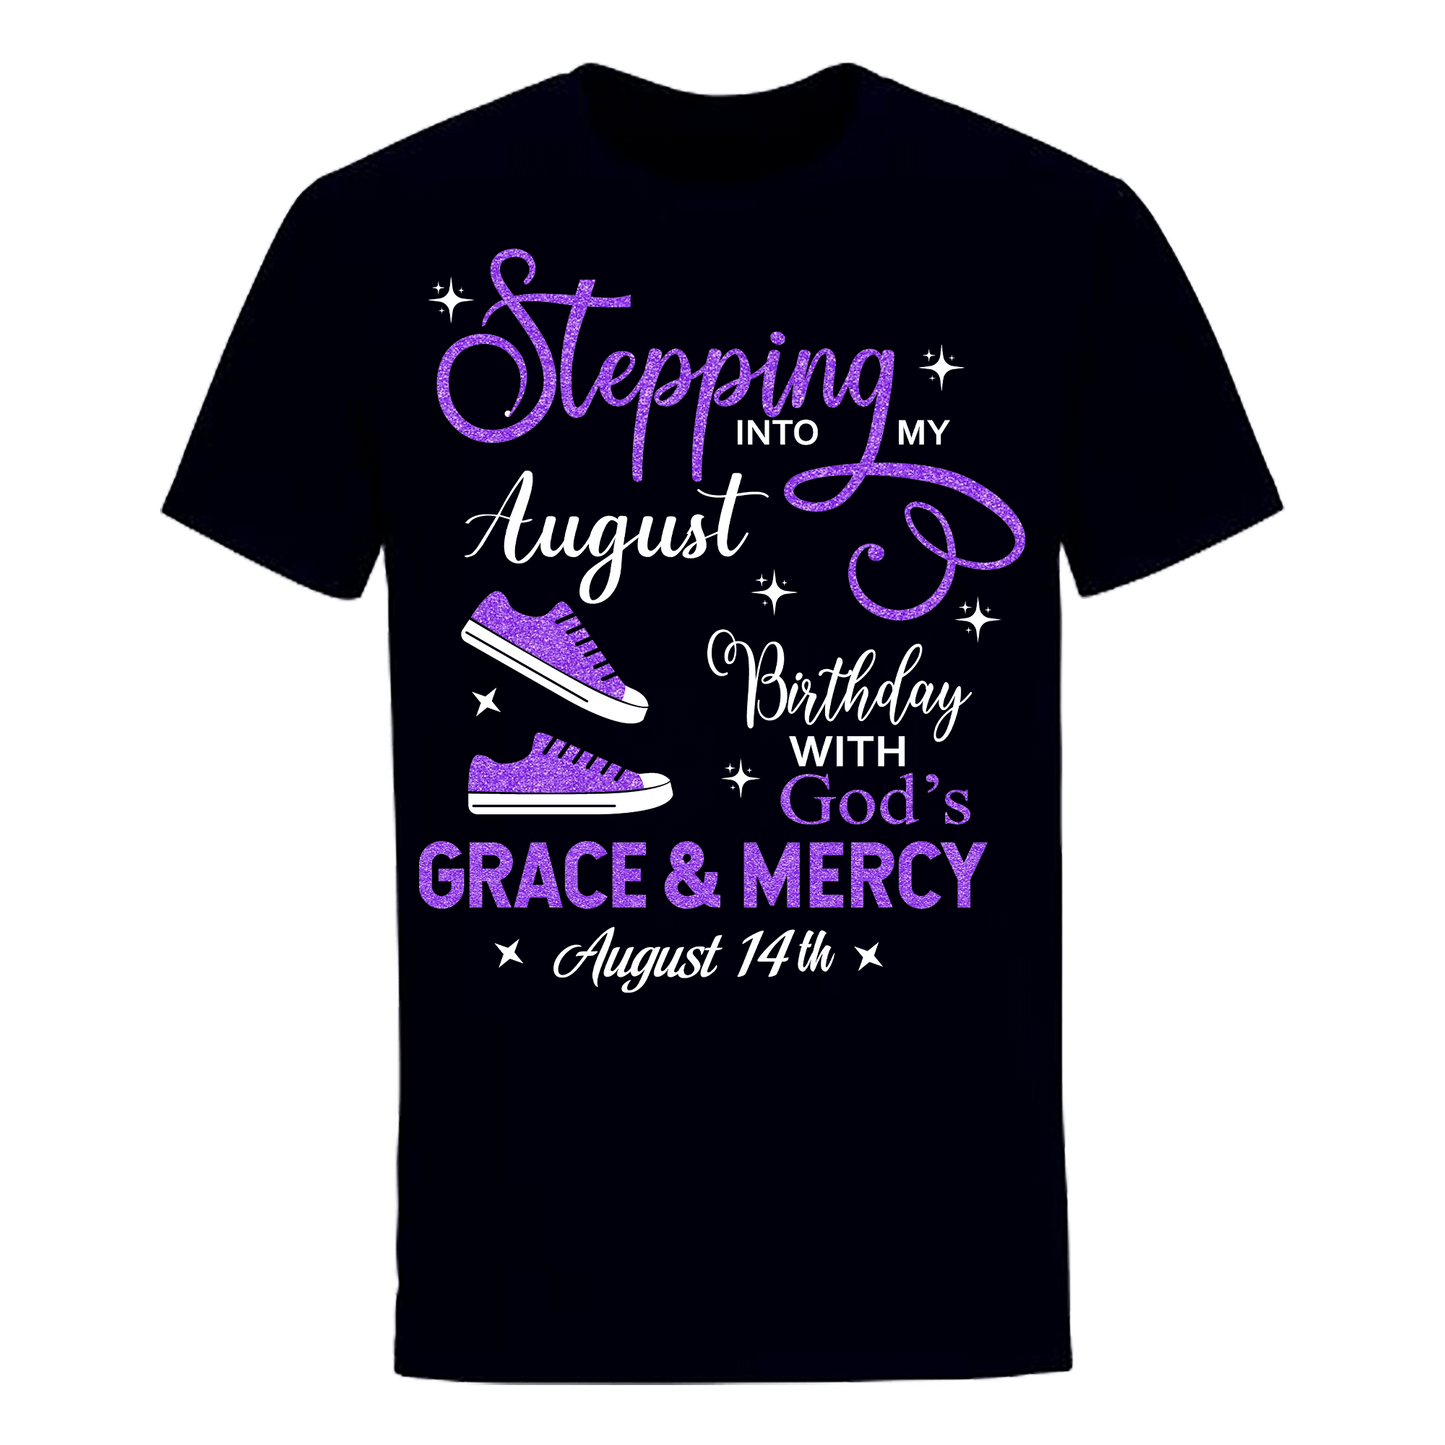 AUGUST 14 GRACE AND MERCY